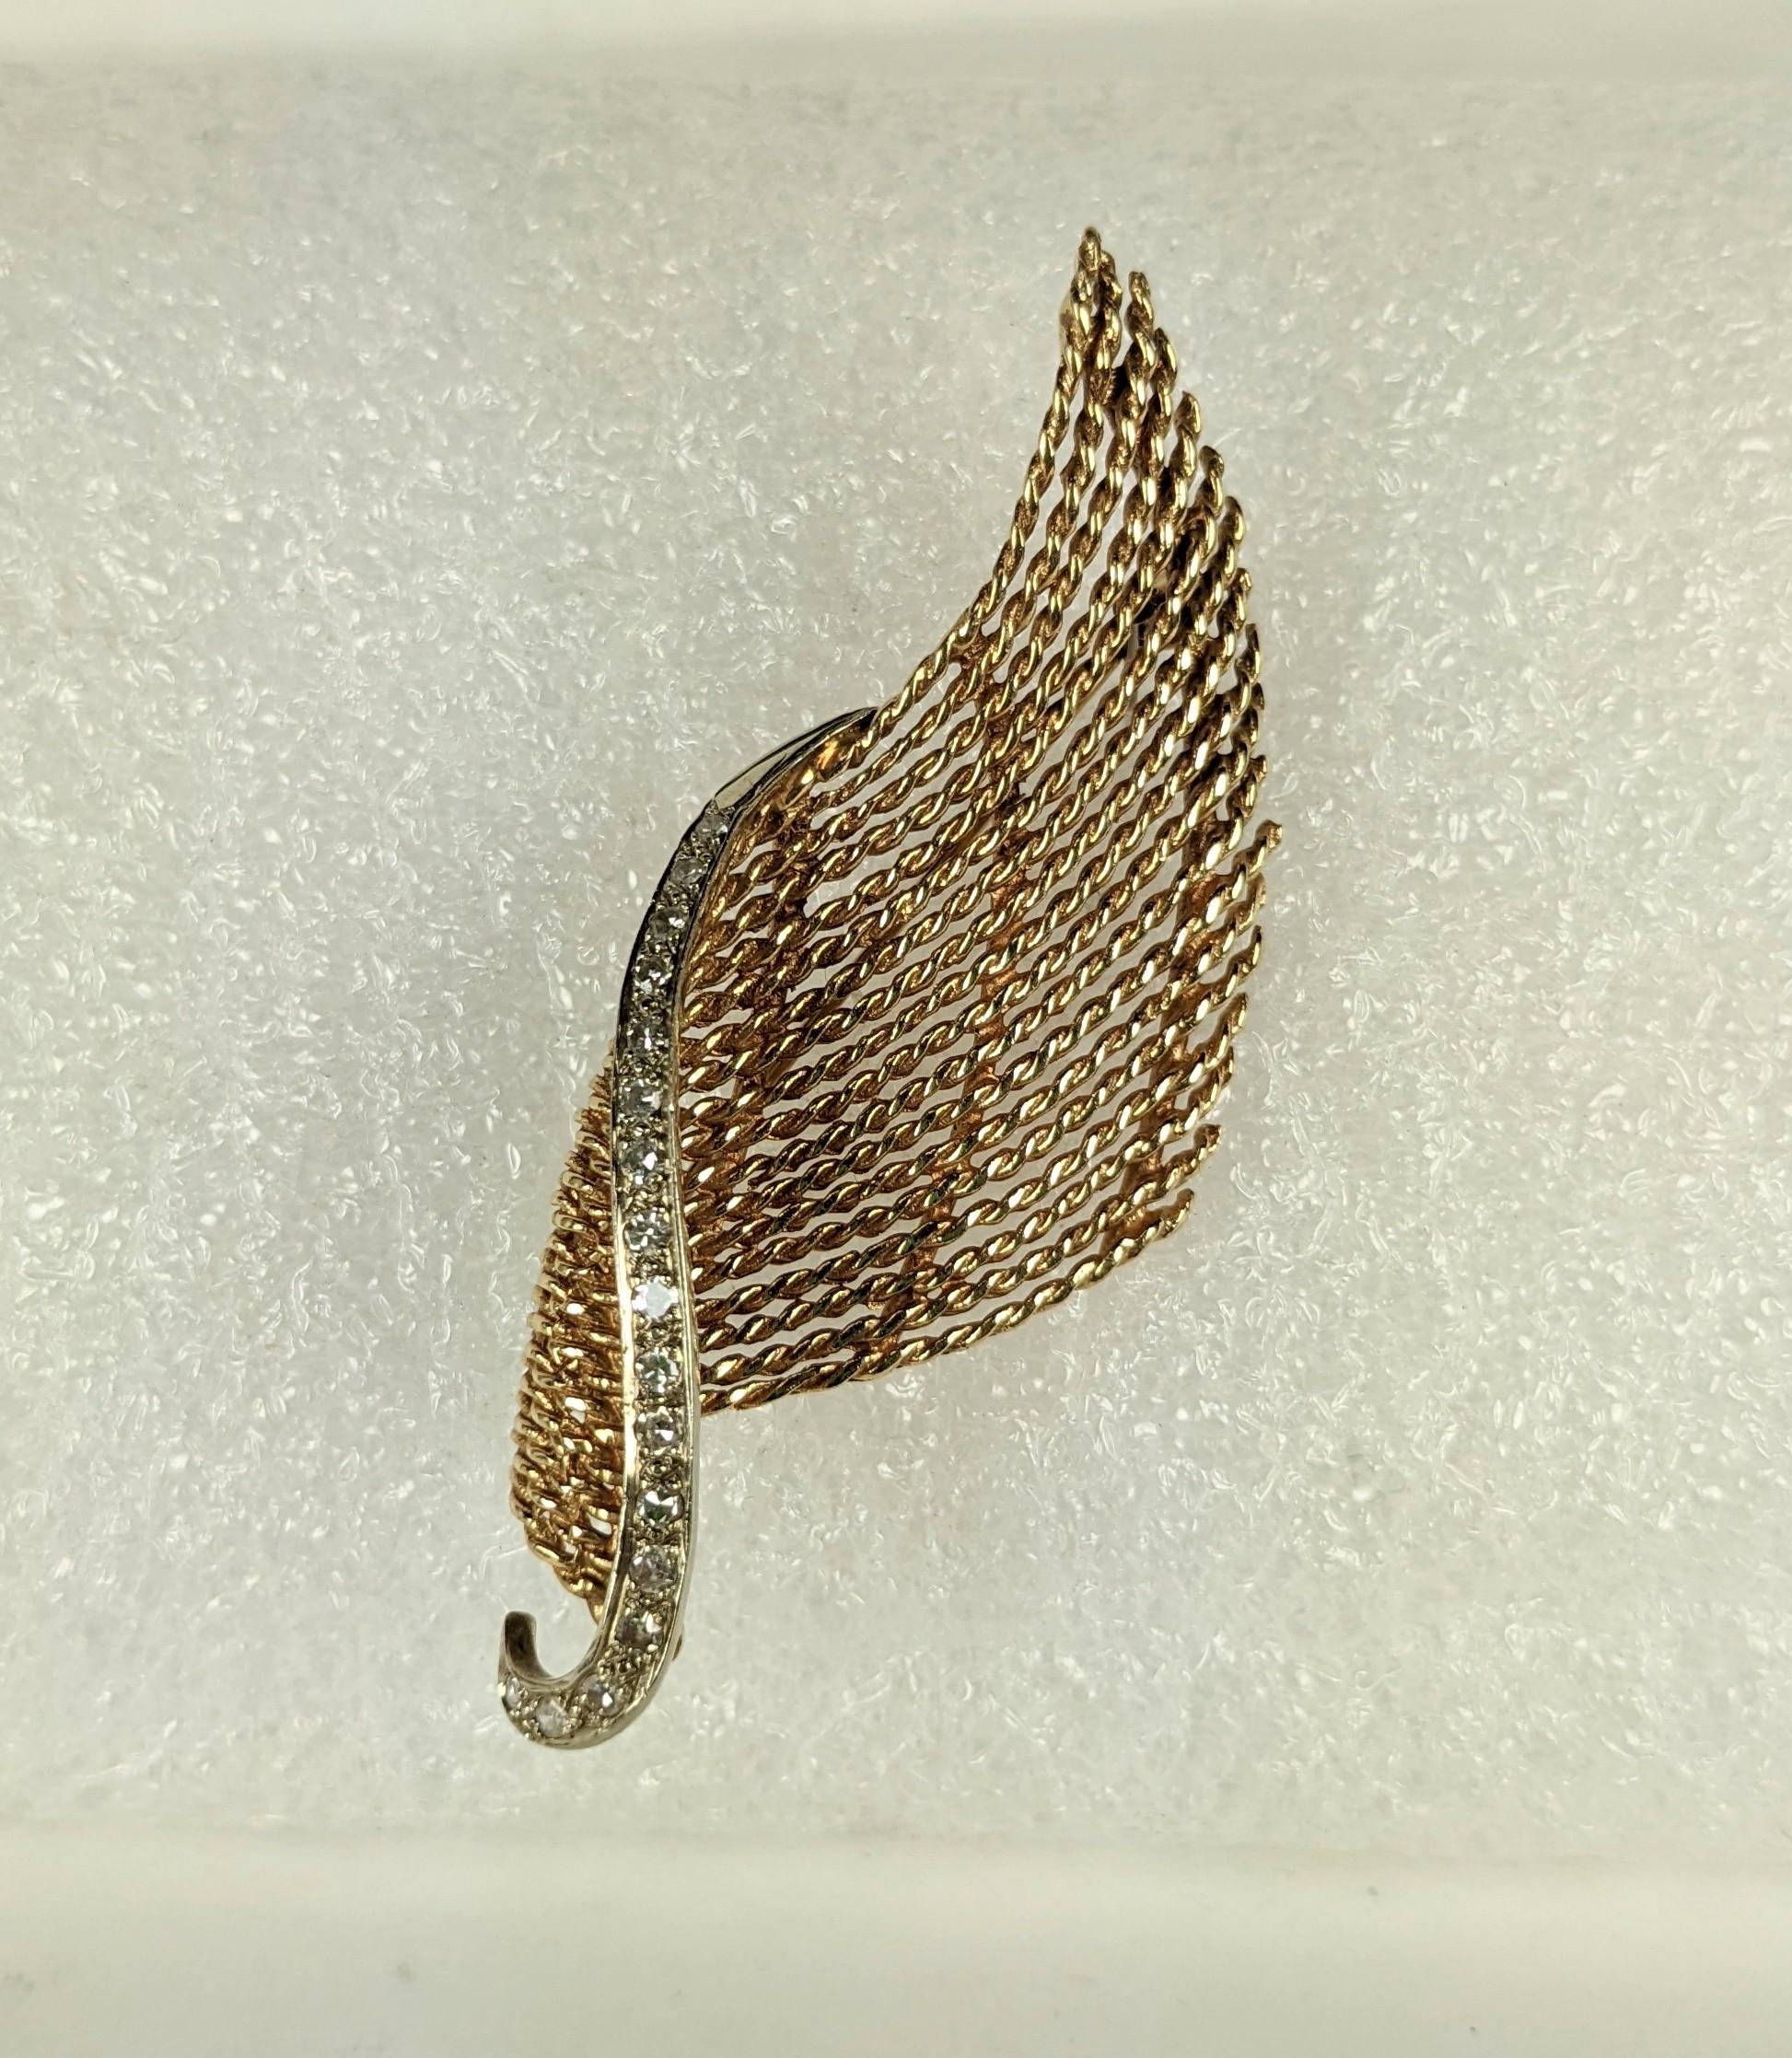 Elegant Diamond and Gold Wave Brooch from the 1960's. A line of bright diamonds lines the edge of this handmade 14k gold brooch. Hand twisted wires are used to give texture to the dimensional wave which can be worn in many different directions. 2.5